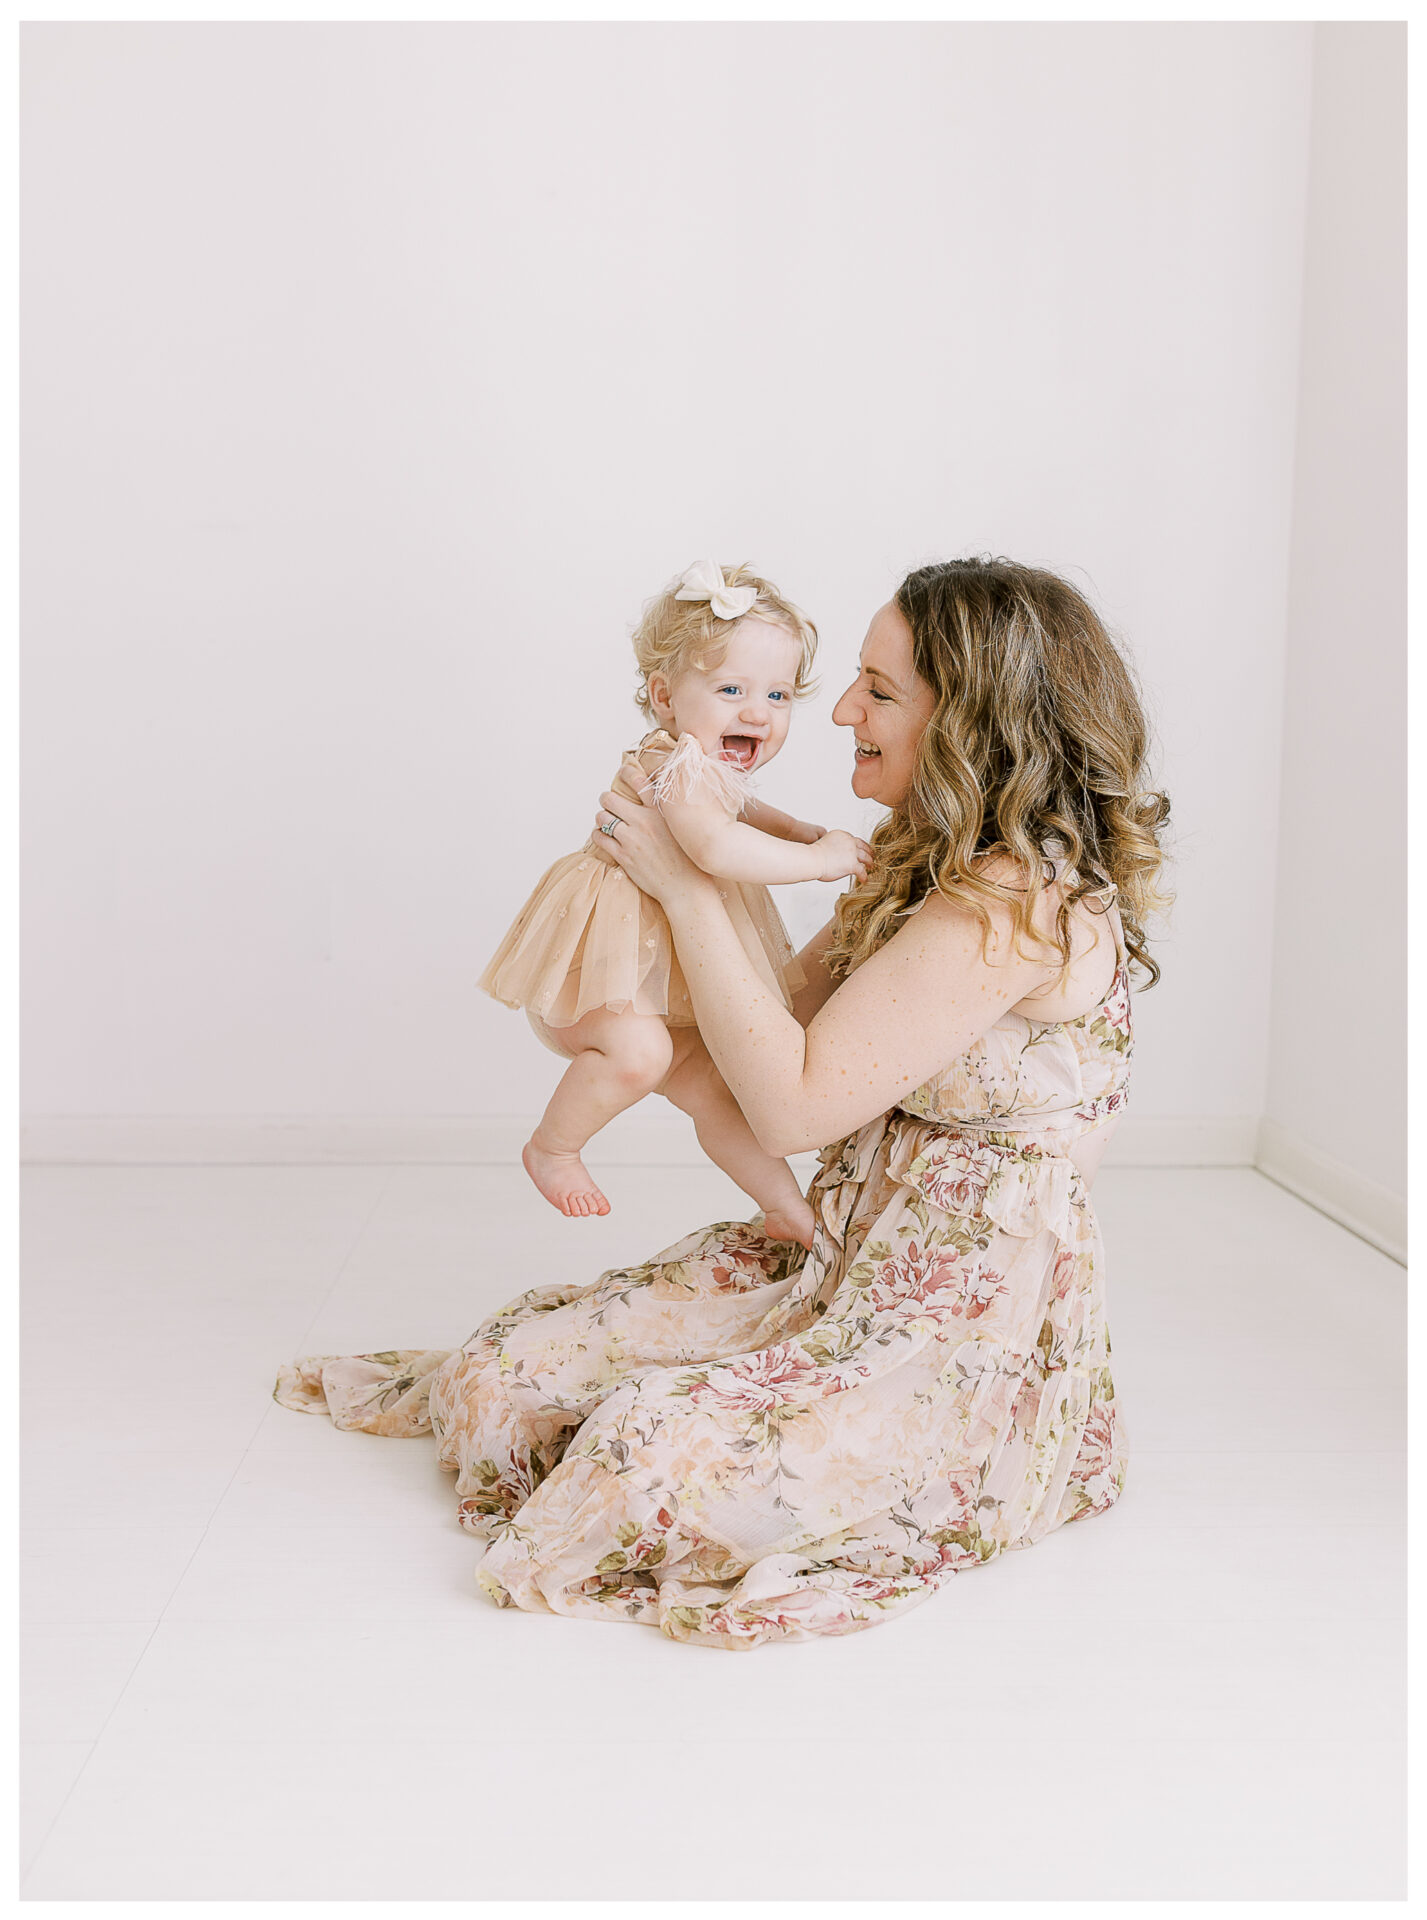 Winter Freire Photography | First birthday photos for baby girl in a photography studio with her mother